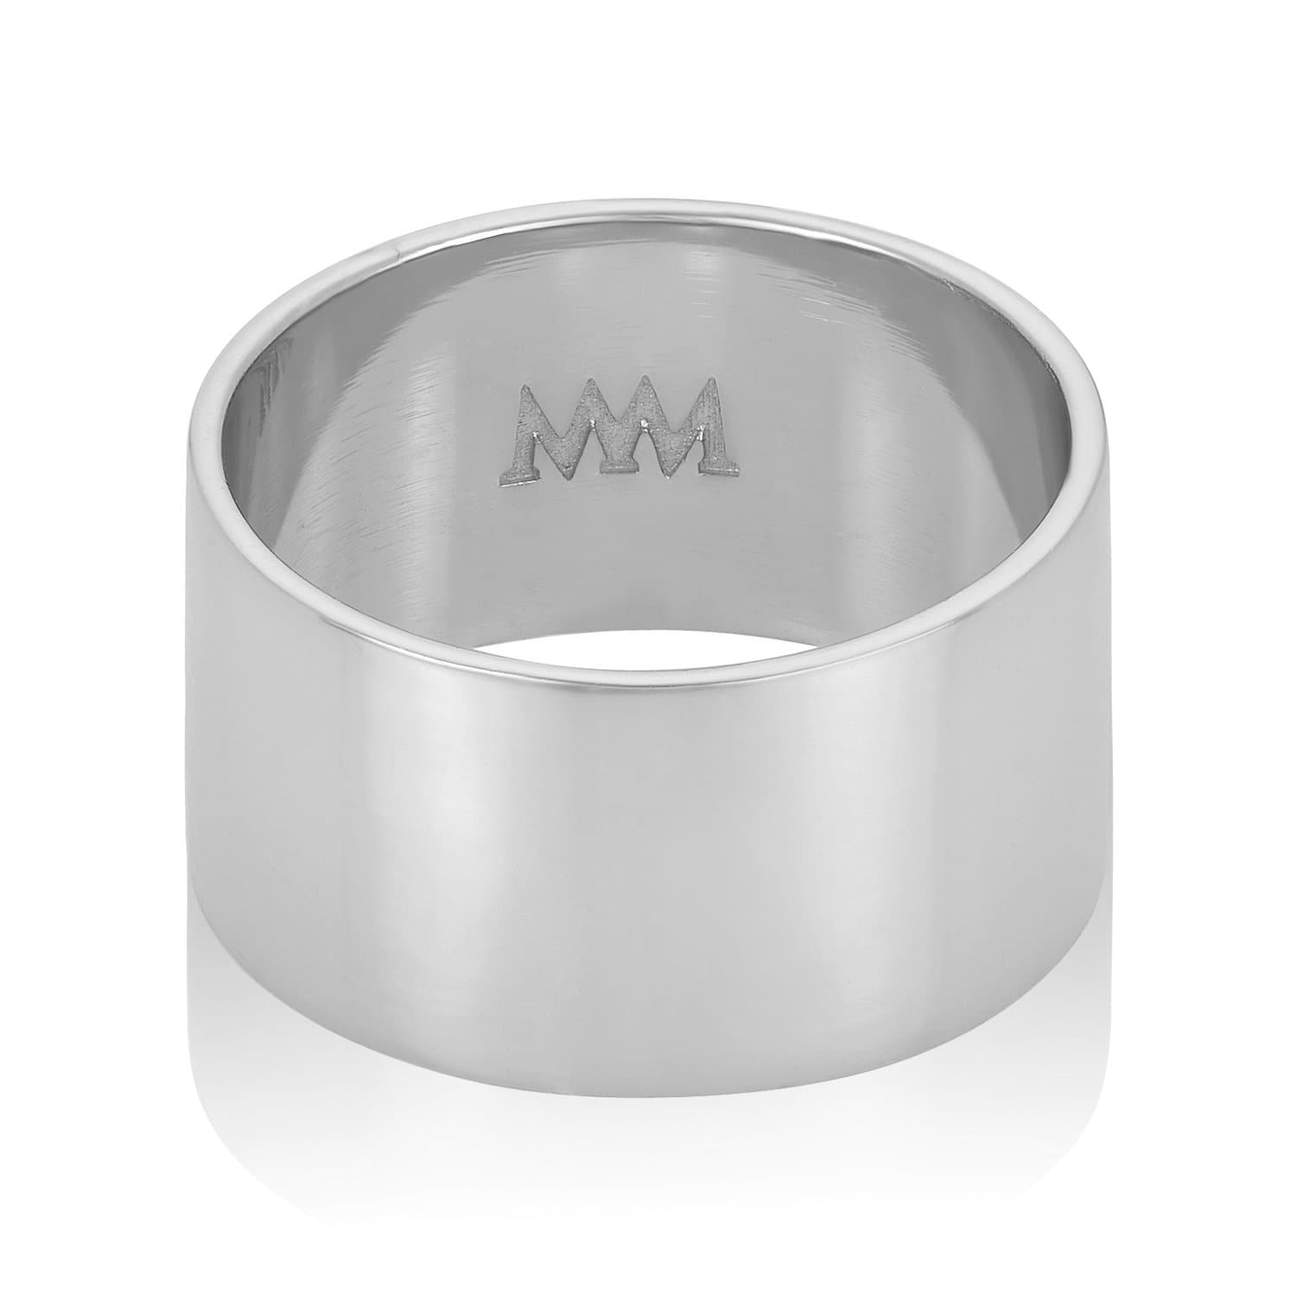 Melinda Maria Jewelry Review - Must Read This Before Buying